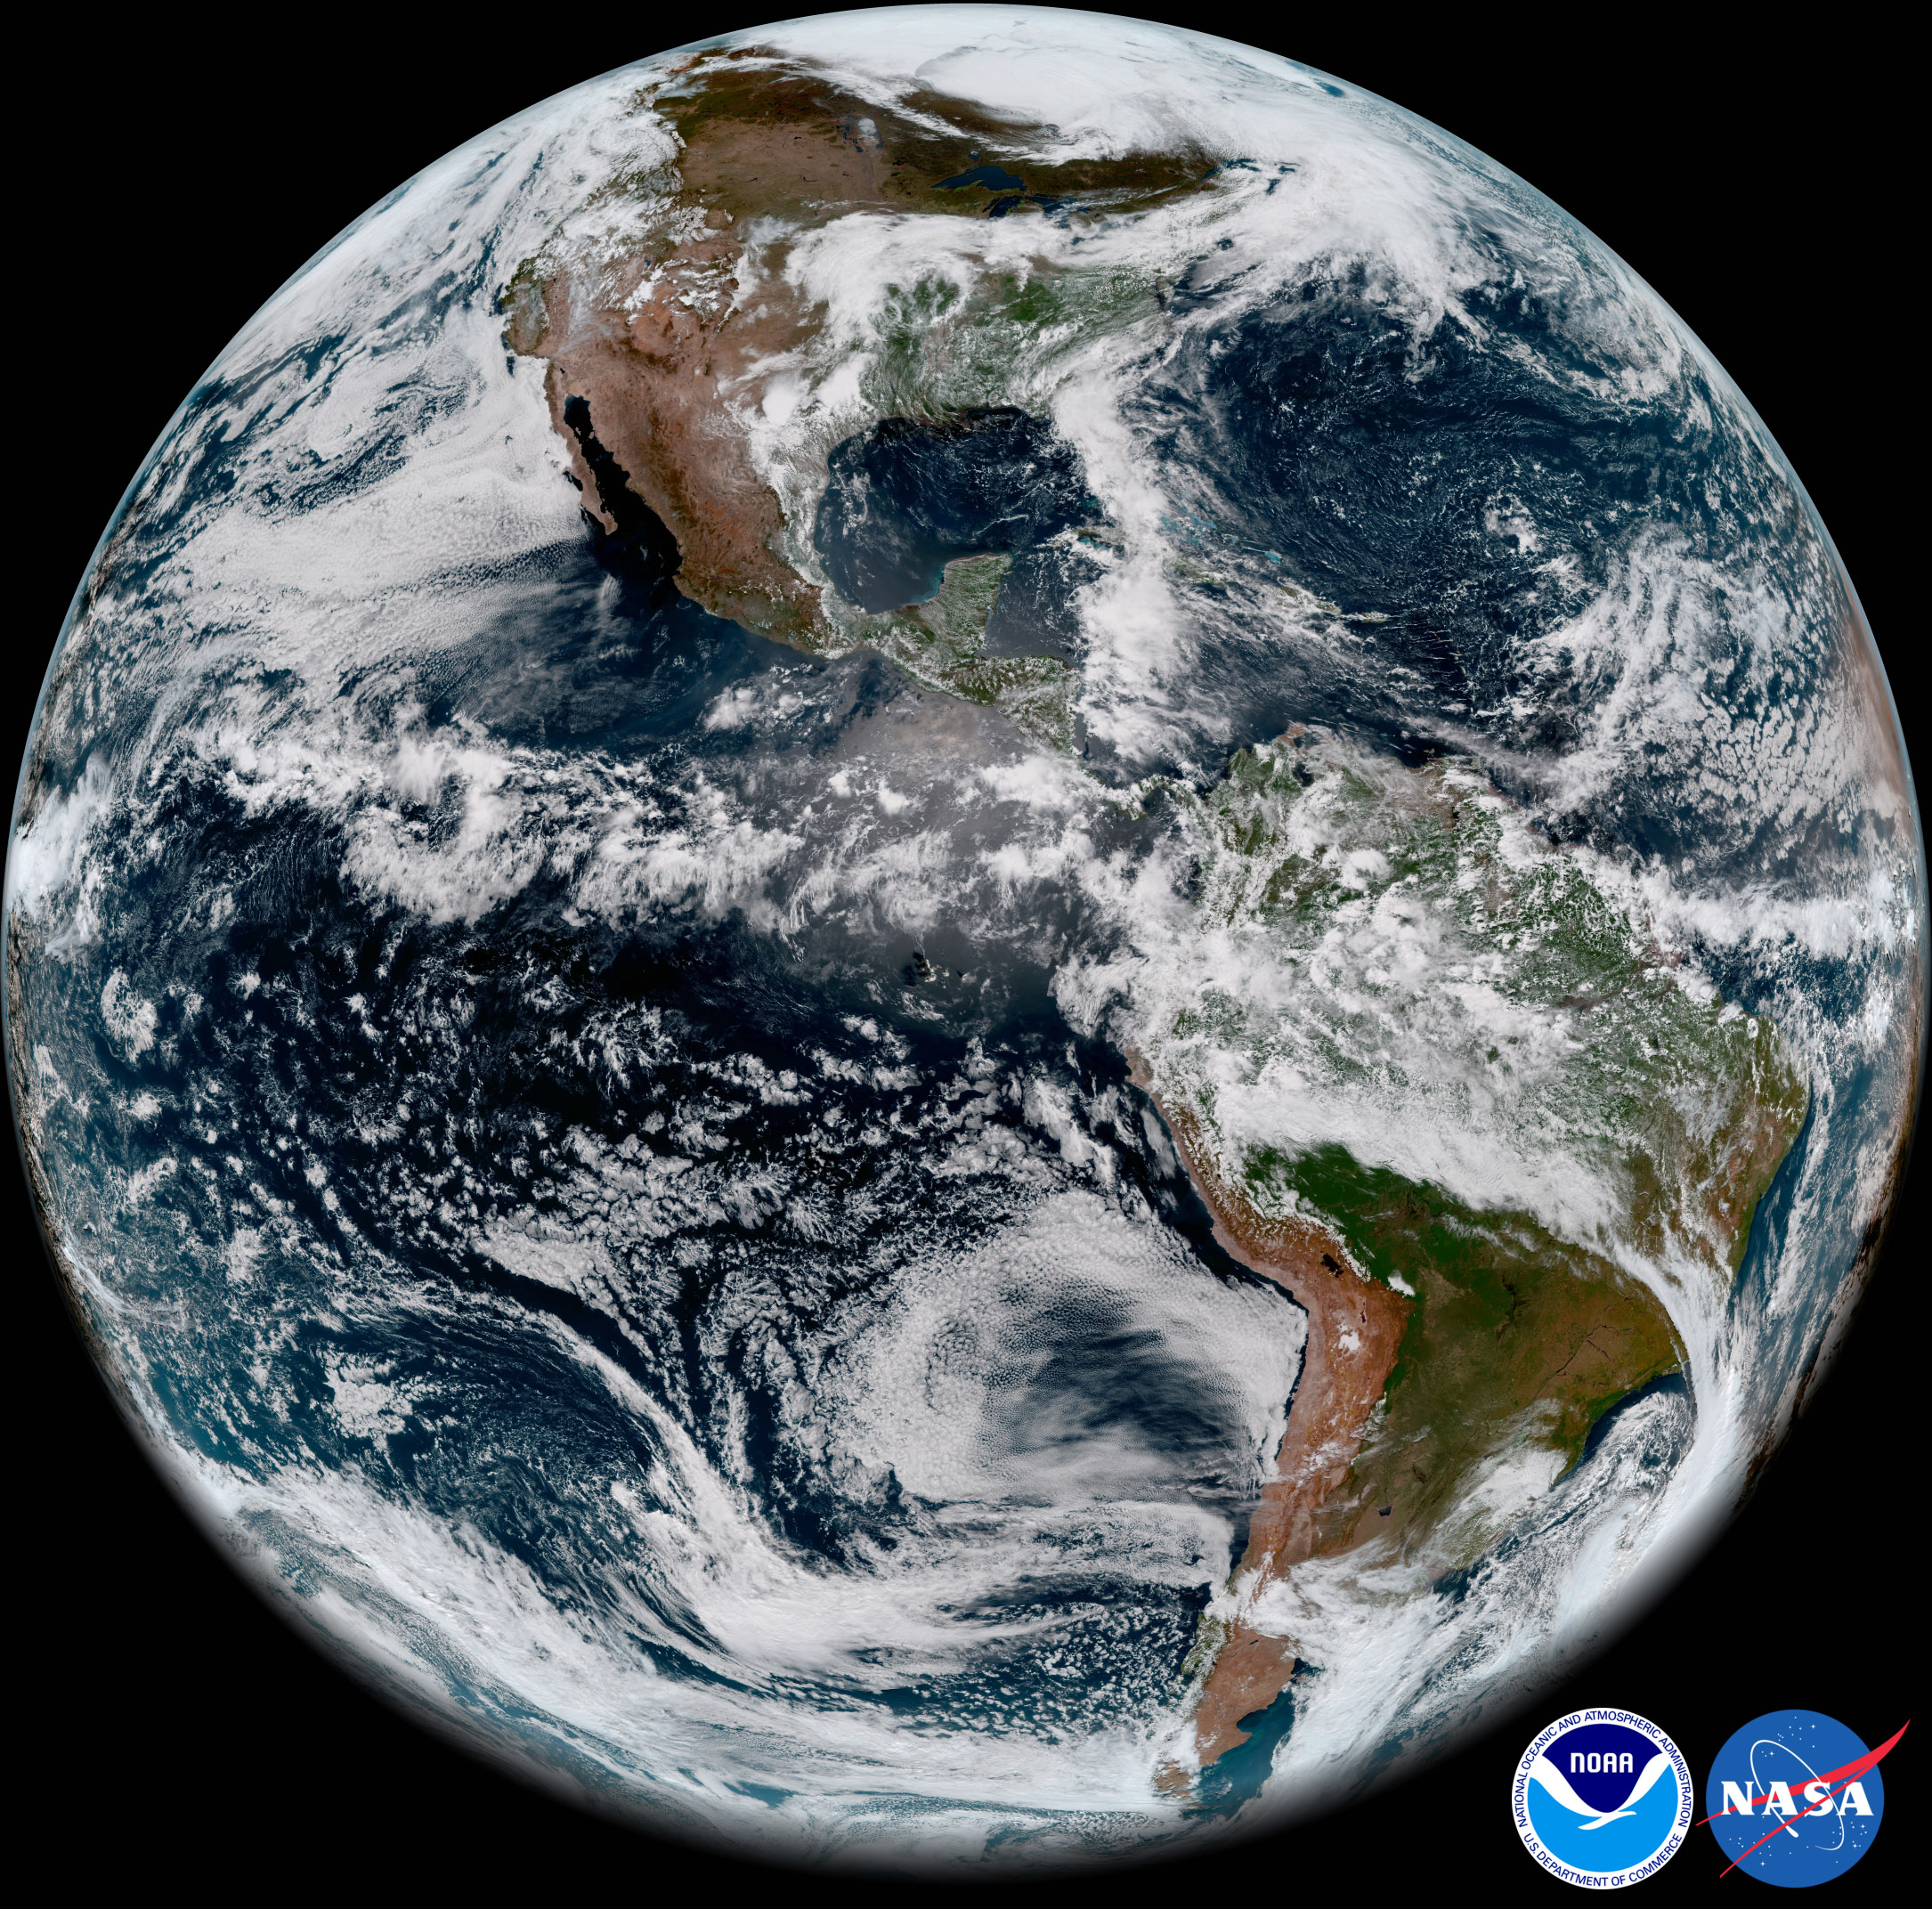 GOES-17 Releases ‘First Light’ Imagery from its Advanced Baseline Imager (ABI)